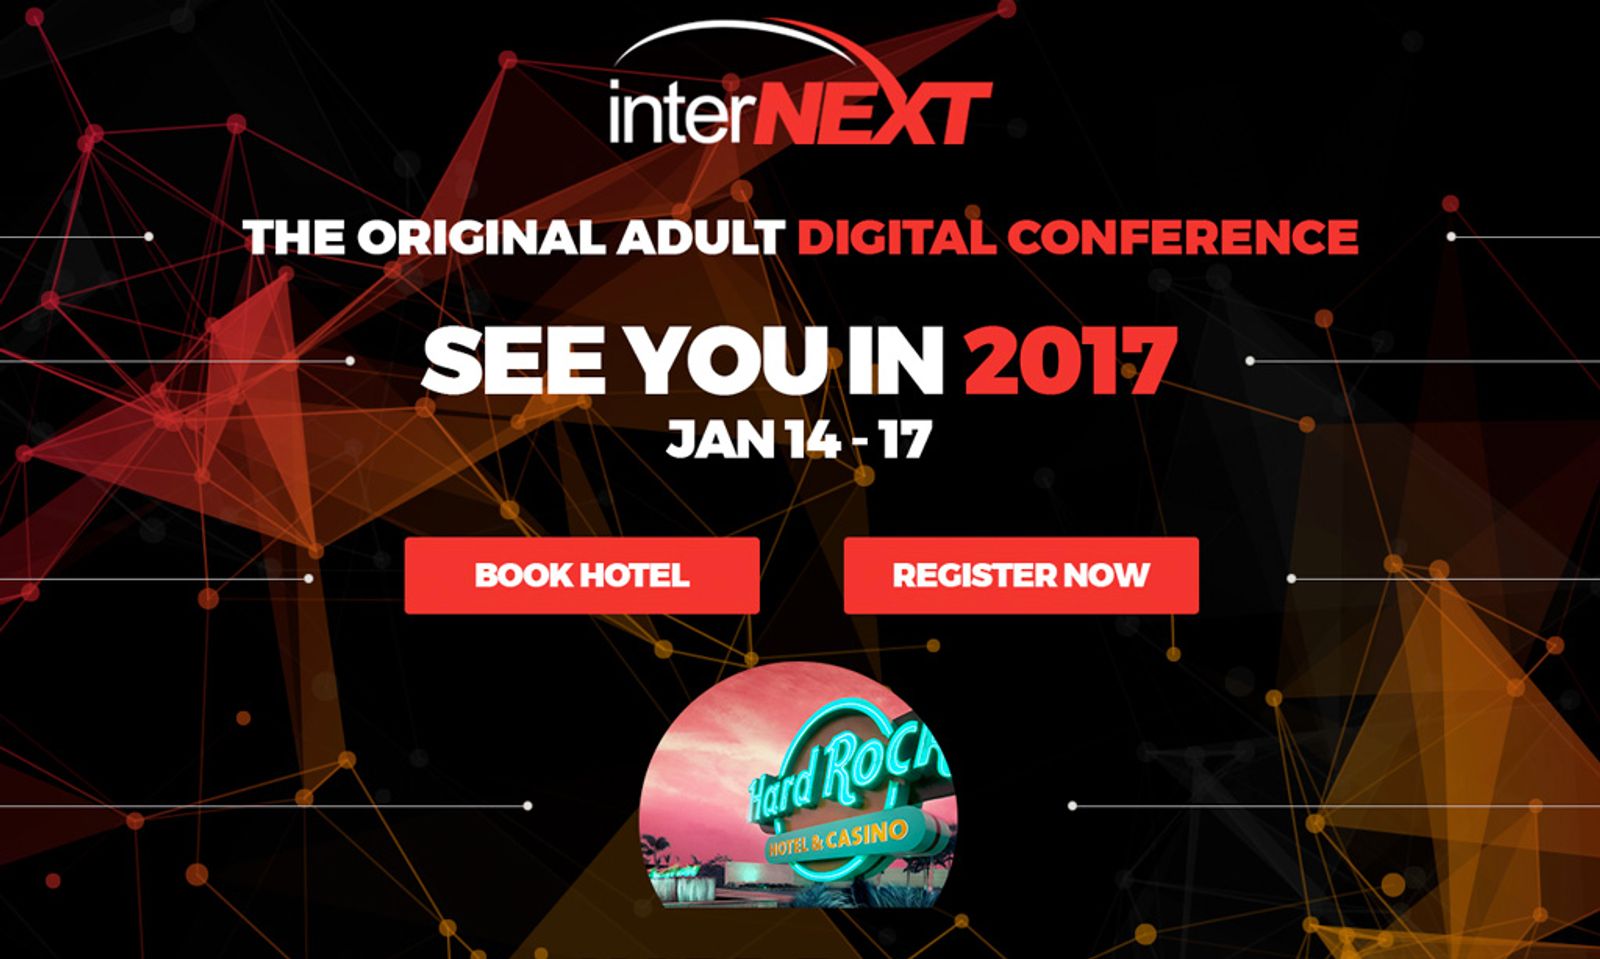 Register Now for Internext Expo Early-Bird Discount